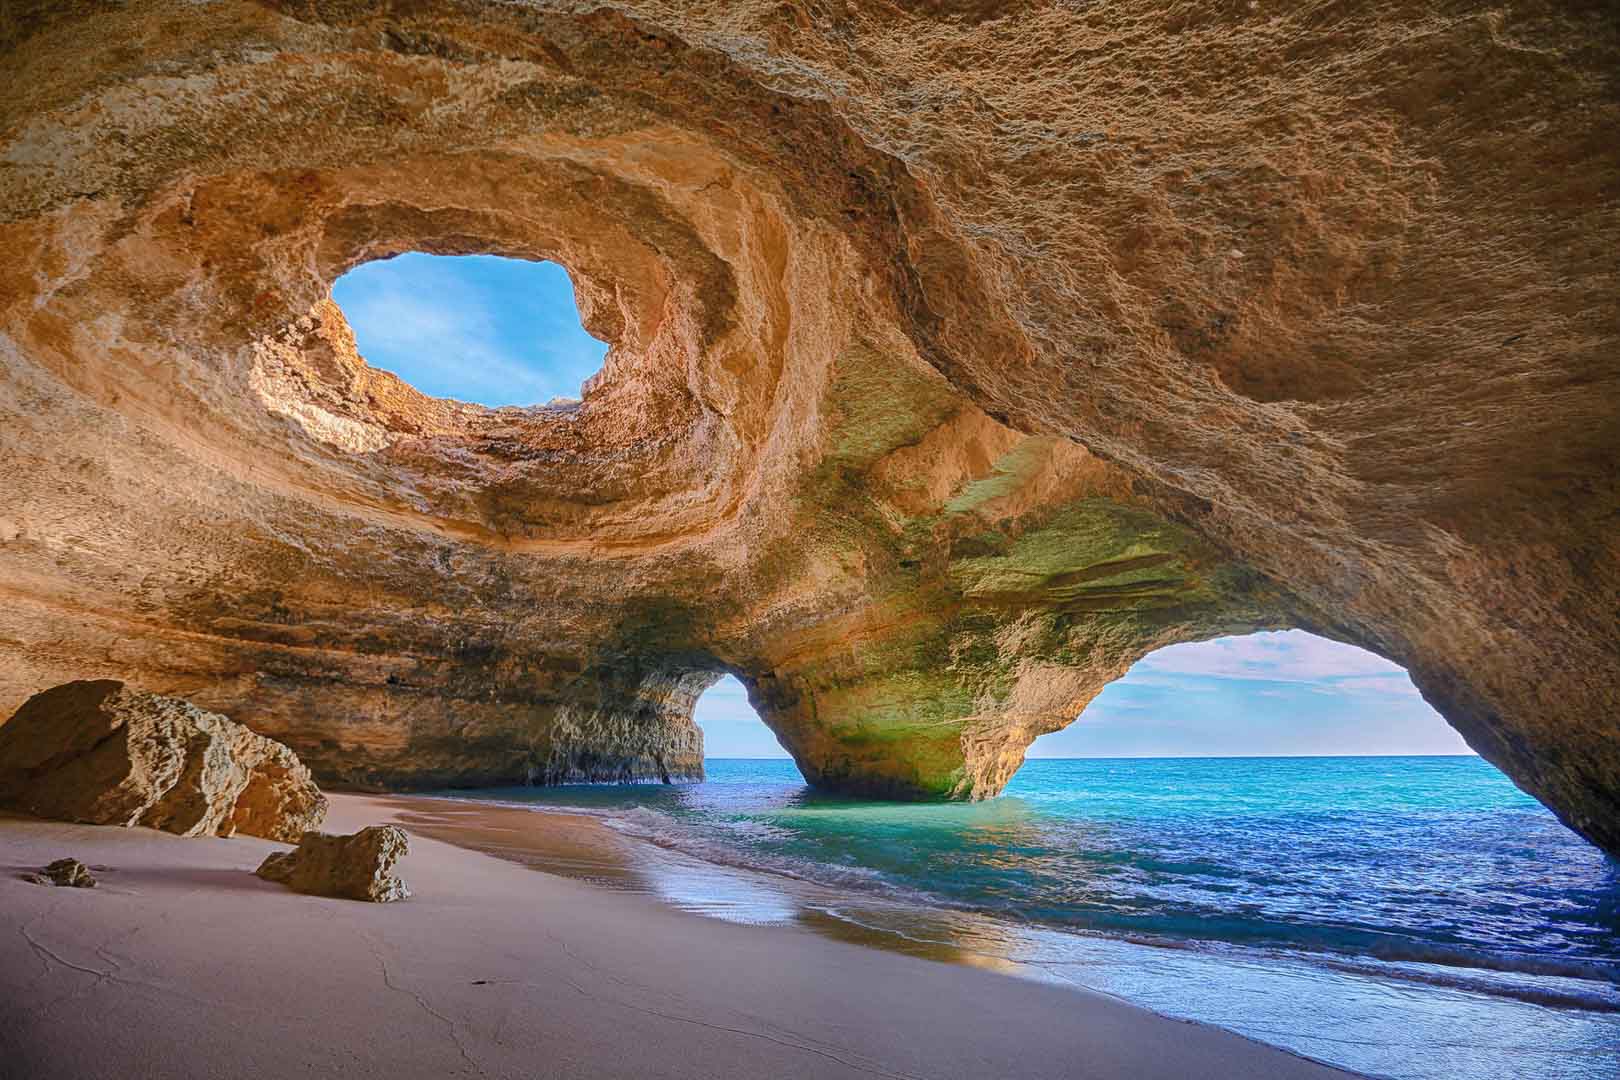 36 BEST places to Visit in Algarve Portugal + free map included!